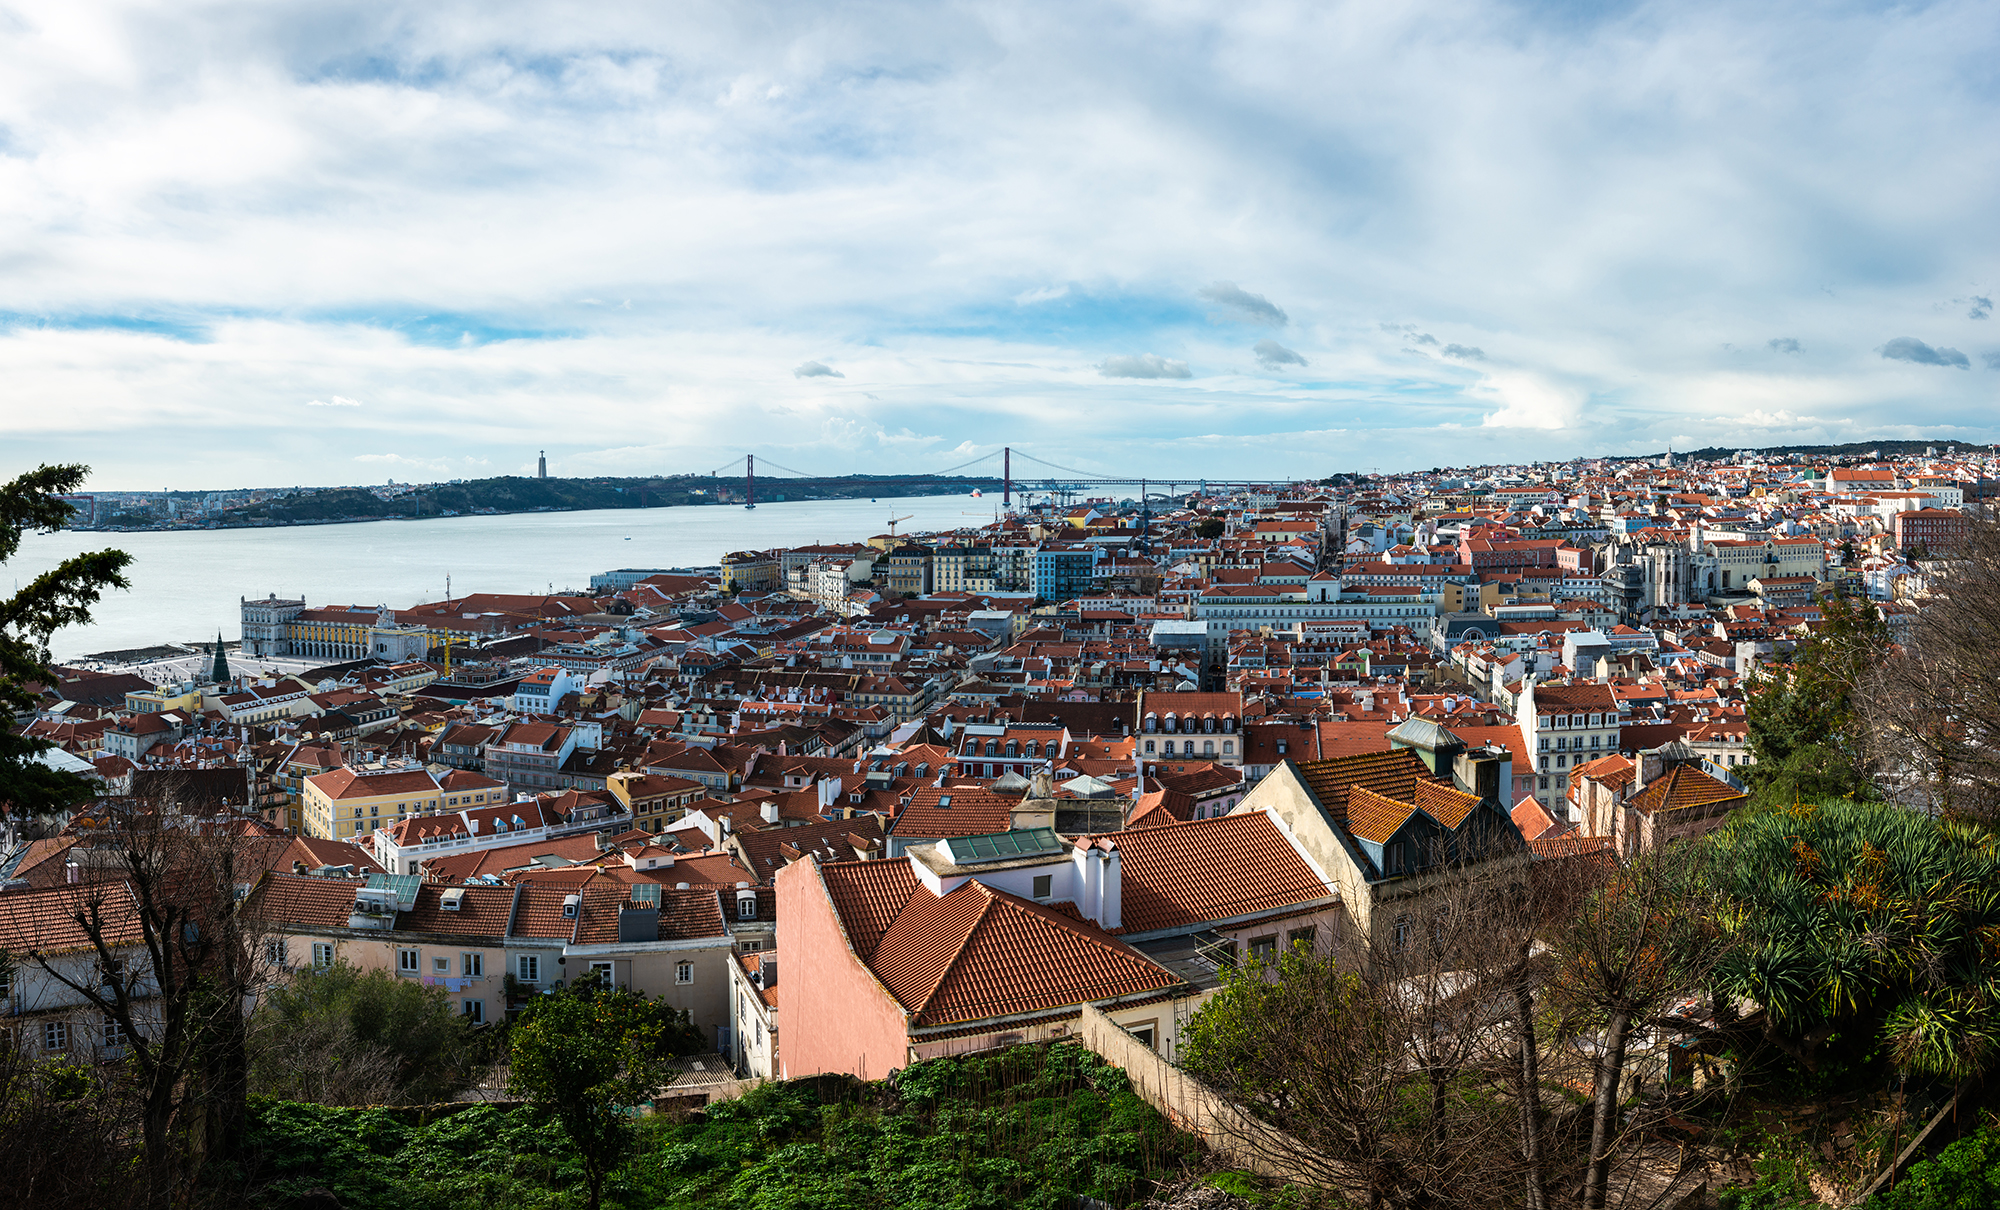 Skyline of Lisbon, with Almada and the 25 de Abril bridge over the Tagus river in the background